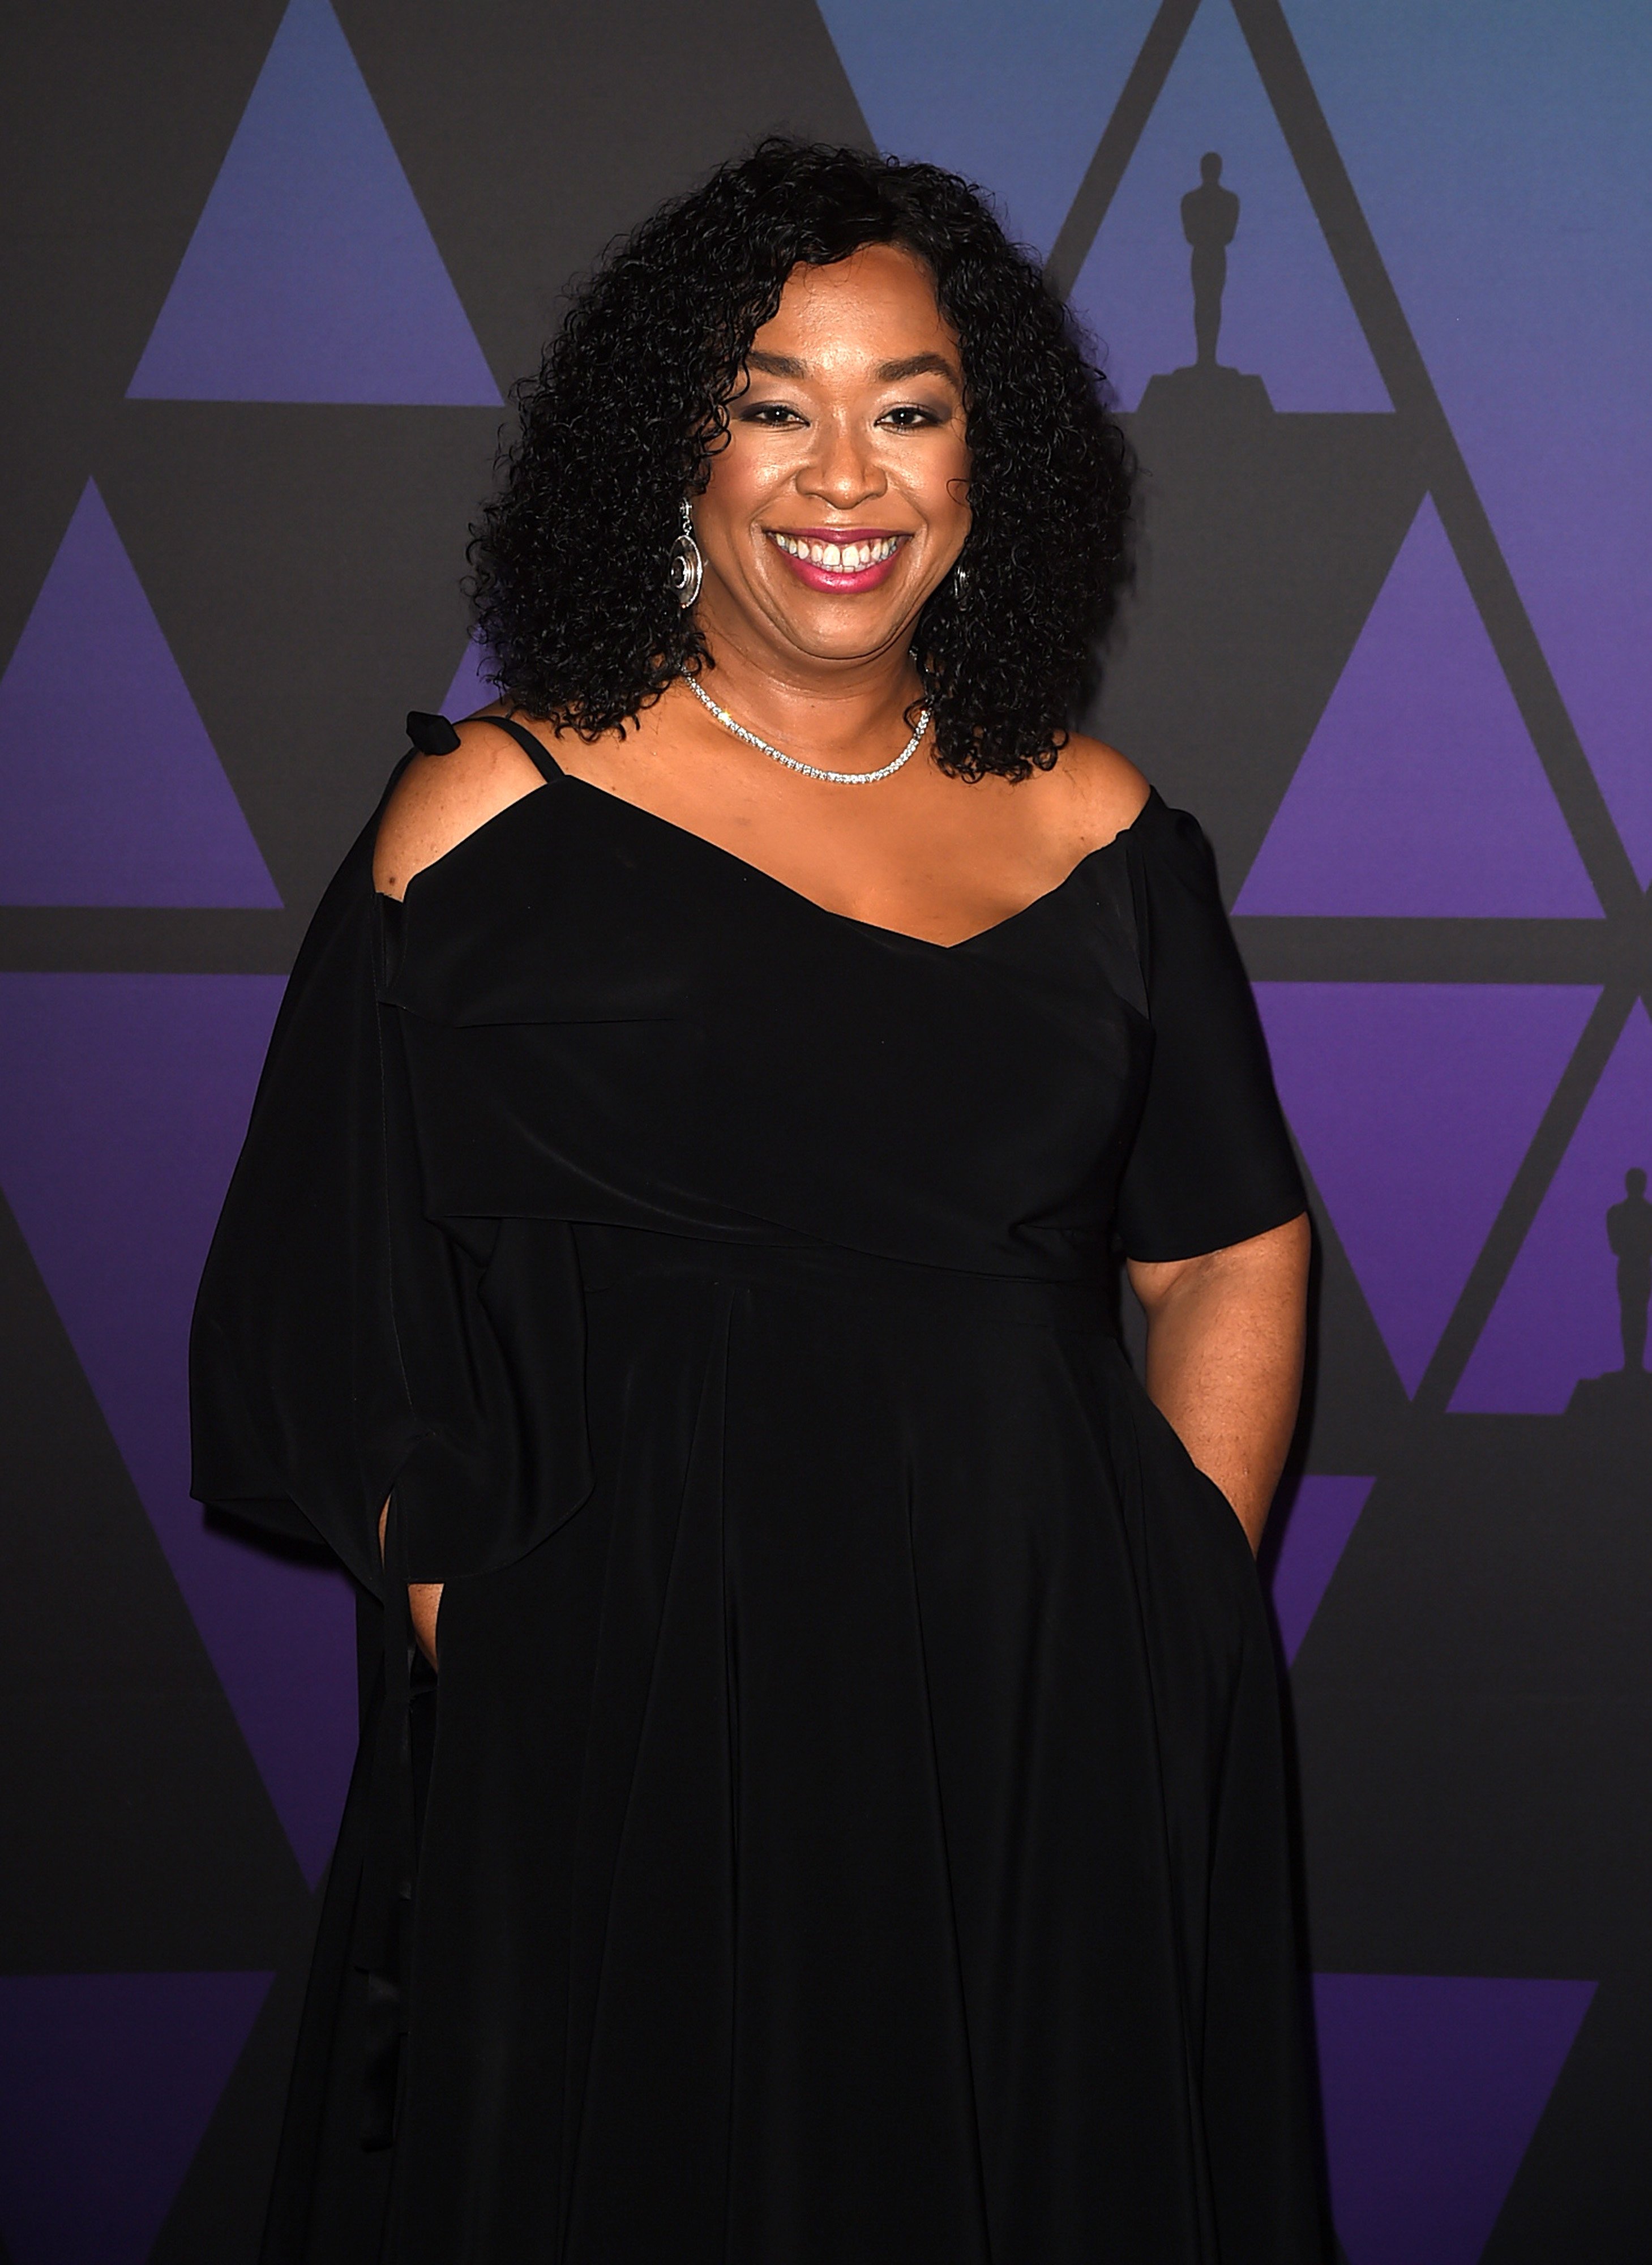 Shonda Rhimes at the Academy of Motion Picture Arts and Sciences' 10th annual Governors Awards in 2018, in Hollywood. | Source: Getty Images